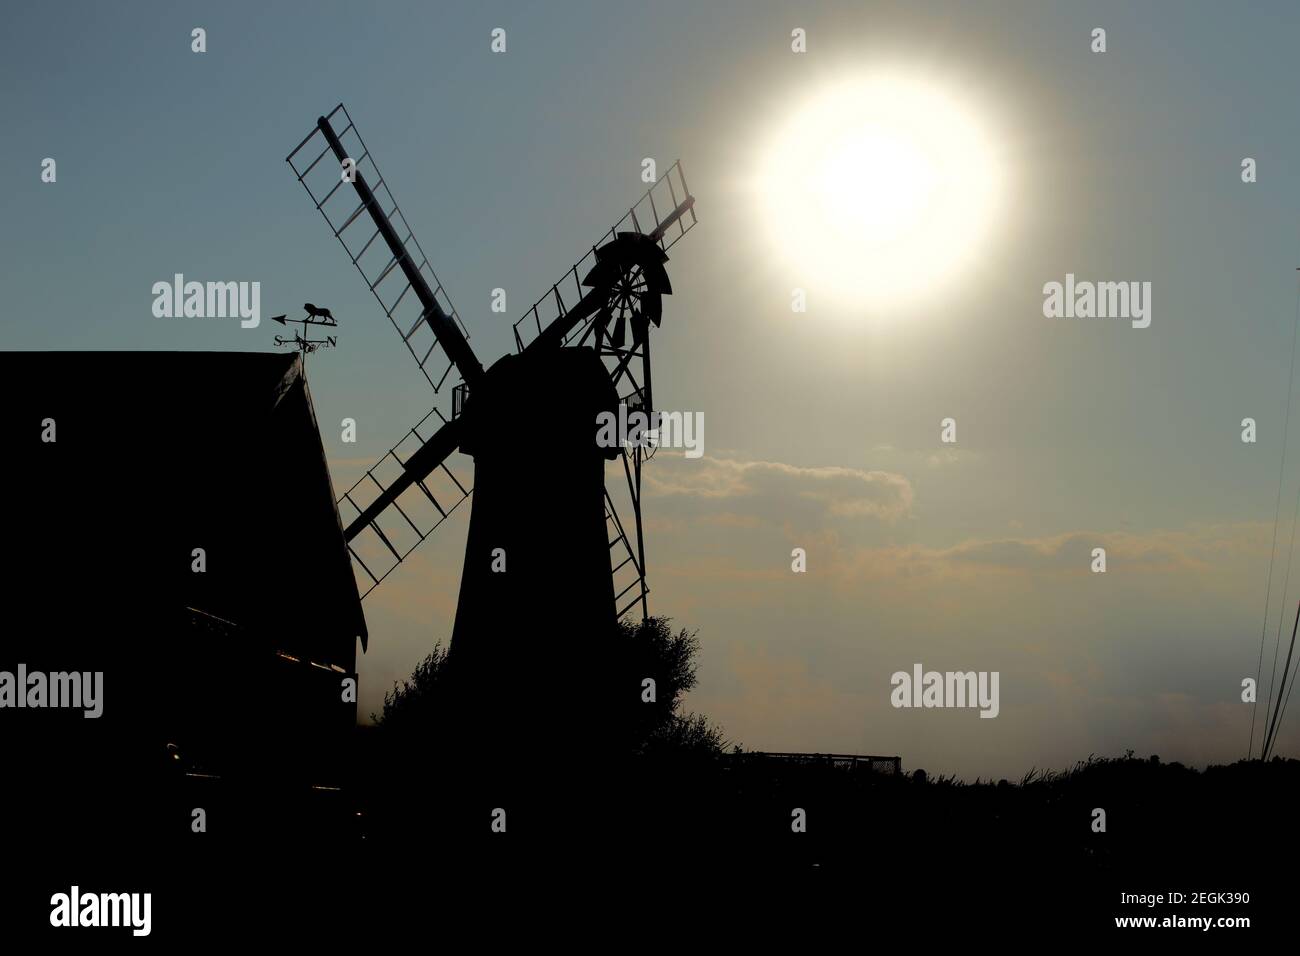 A traditional windmill (wind pump) silhouetted against a large bright low level evening sun. Shadows and darkness shroud the traditional building Stock Photo